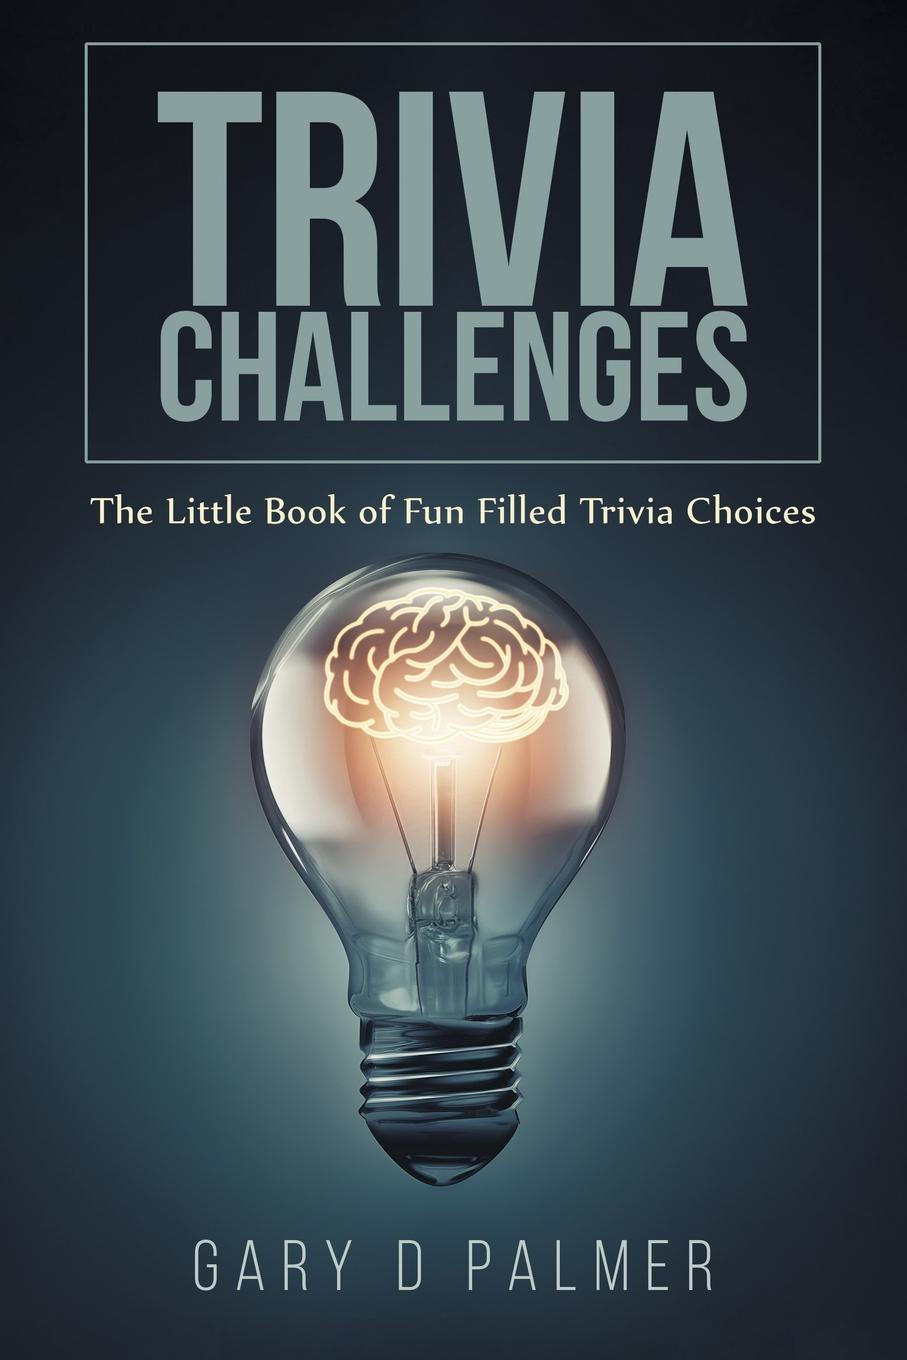 Trivia Challenges. The Little Book of Fun Filled Trivia Choices